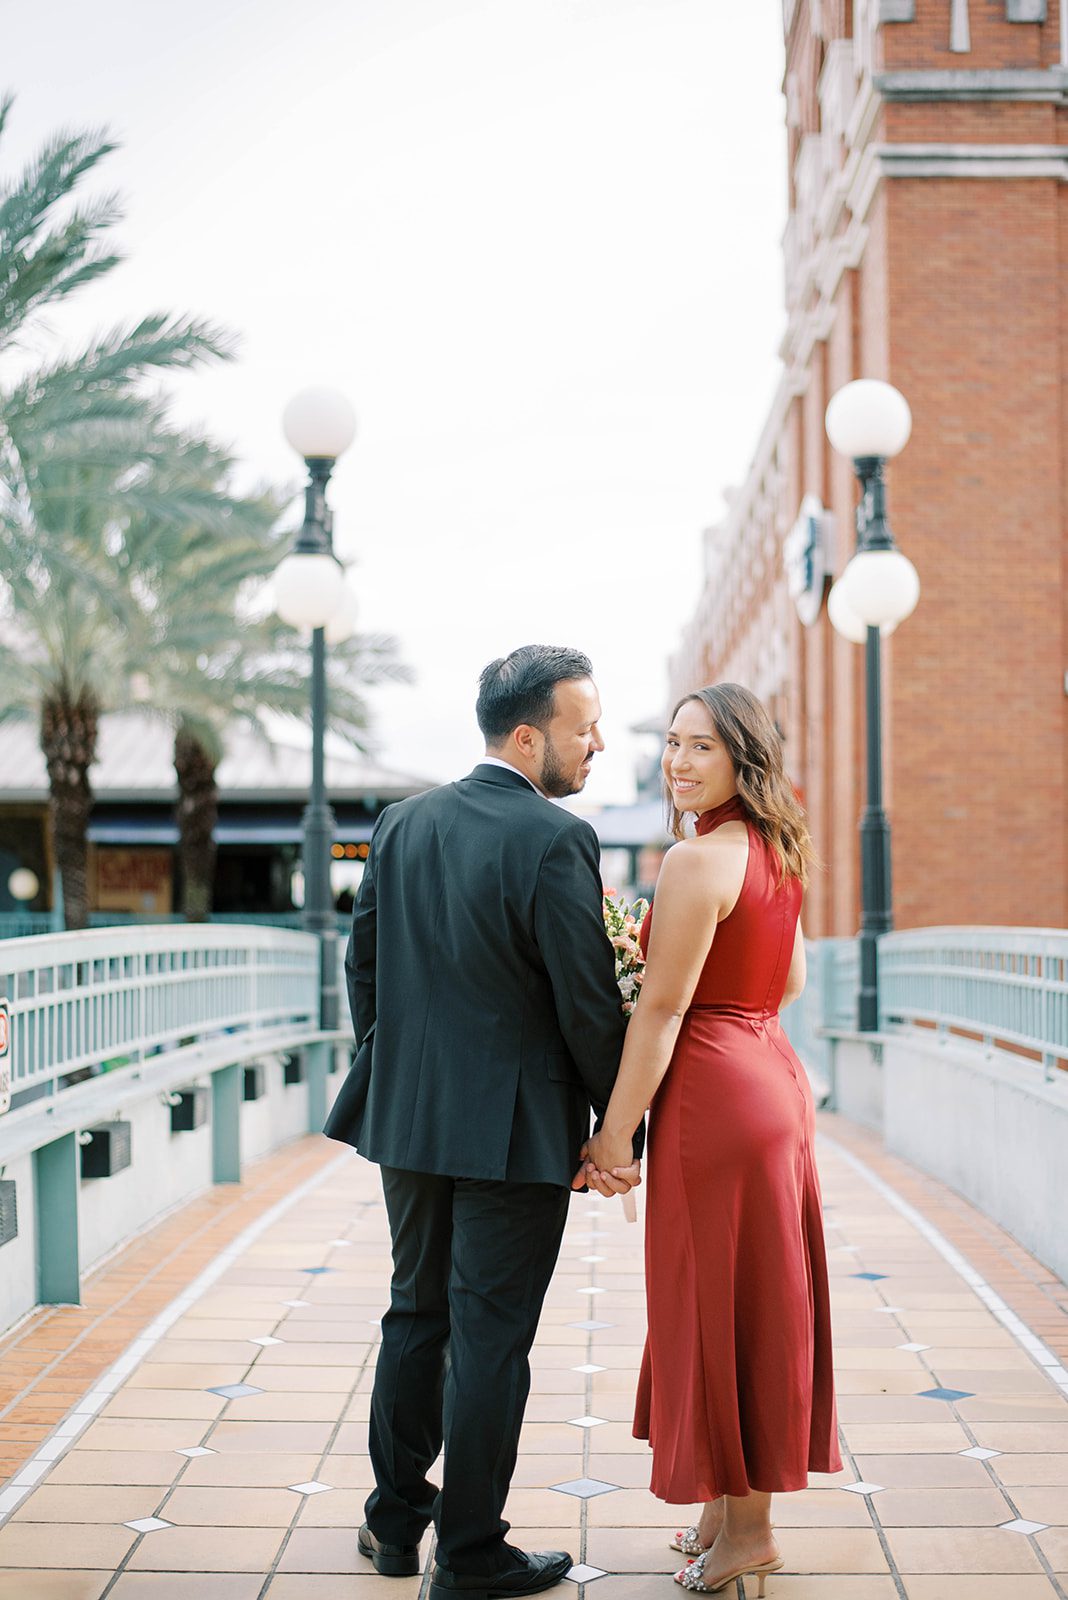 engaged couple walking on a bridge in Ybor City while holding hands and looking over their shoulders back at the camera, the woman is in a red mid length gown and the man is in a black suit with no tie, and old historic building surround them